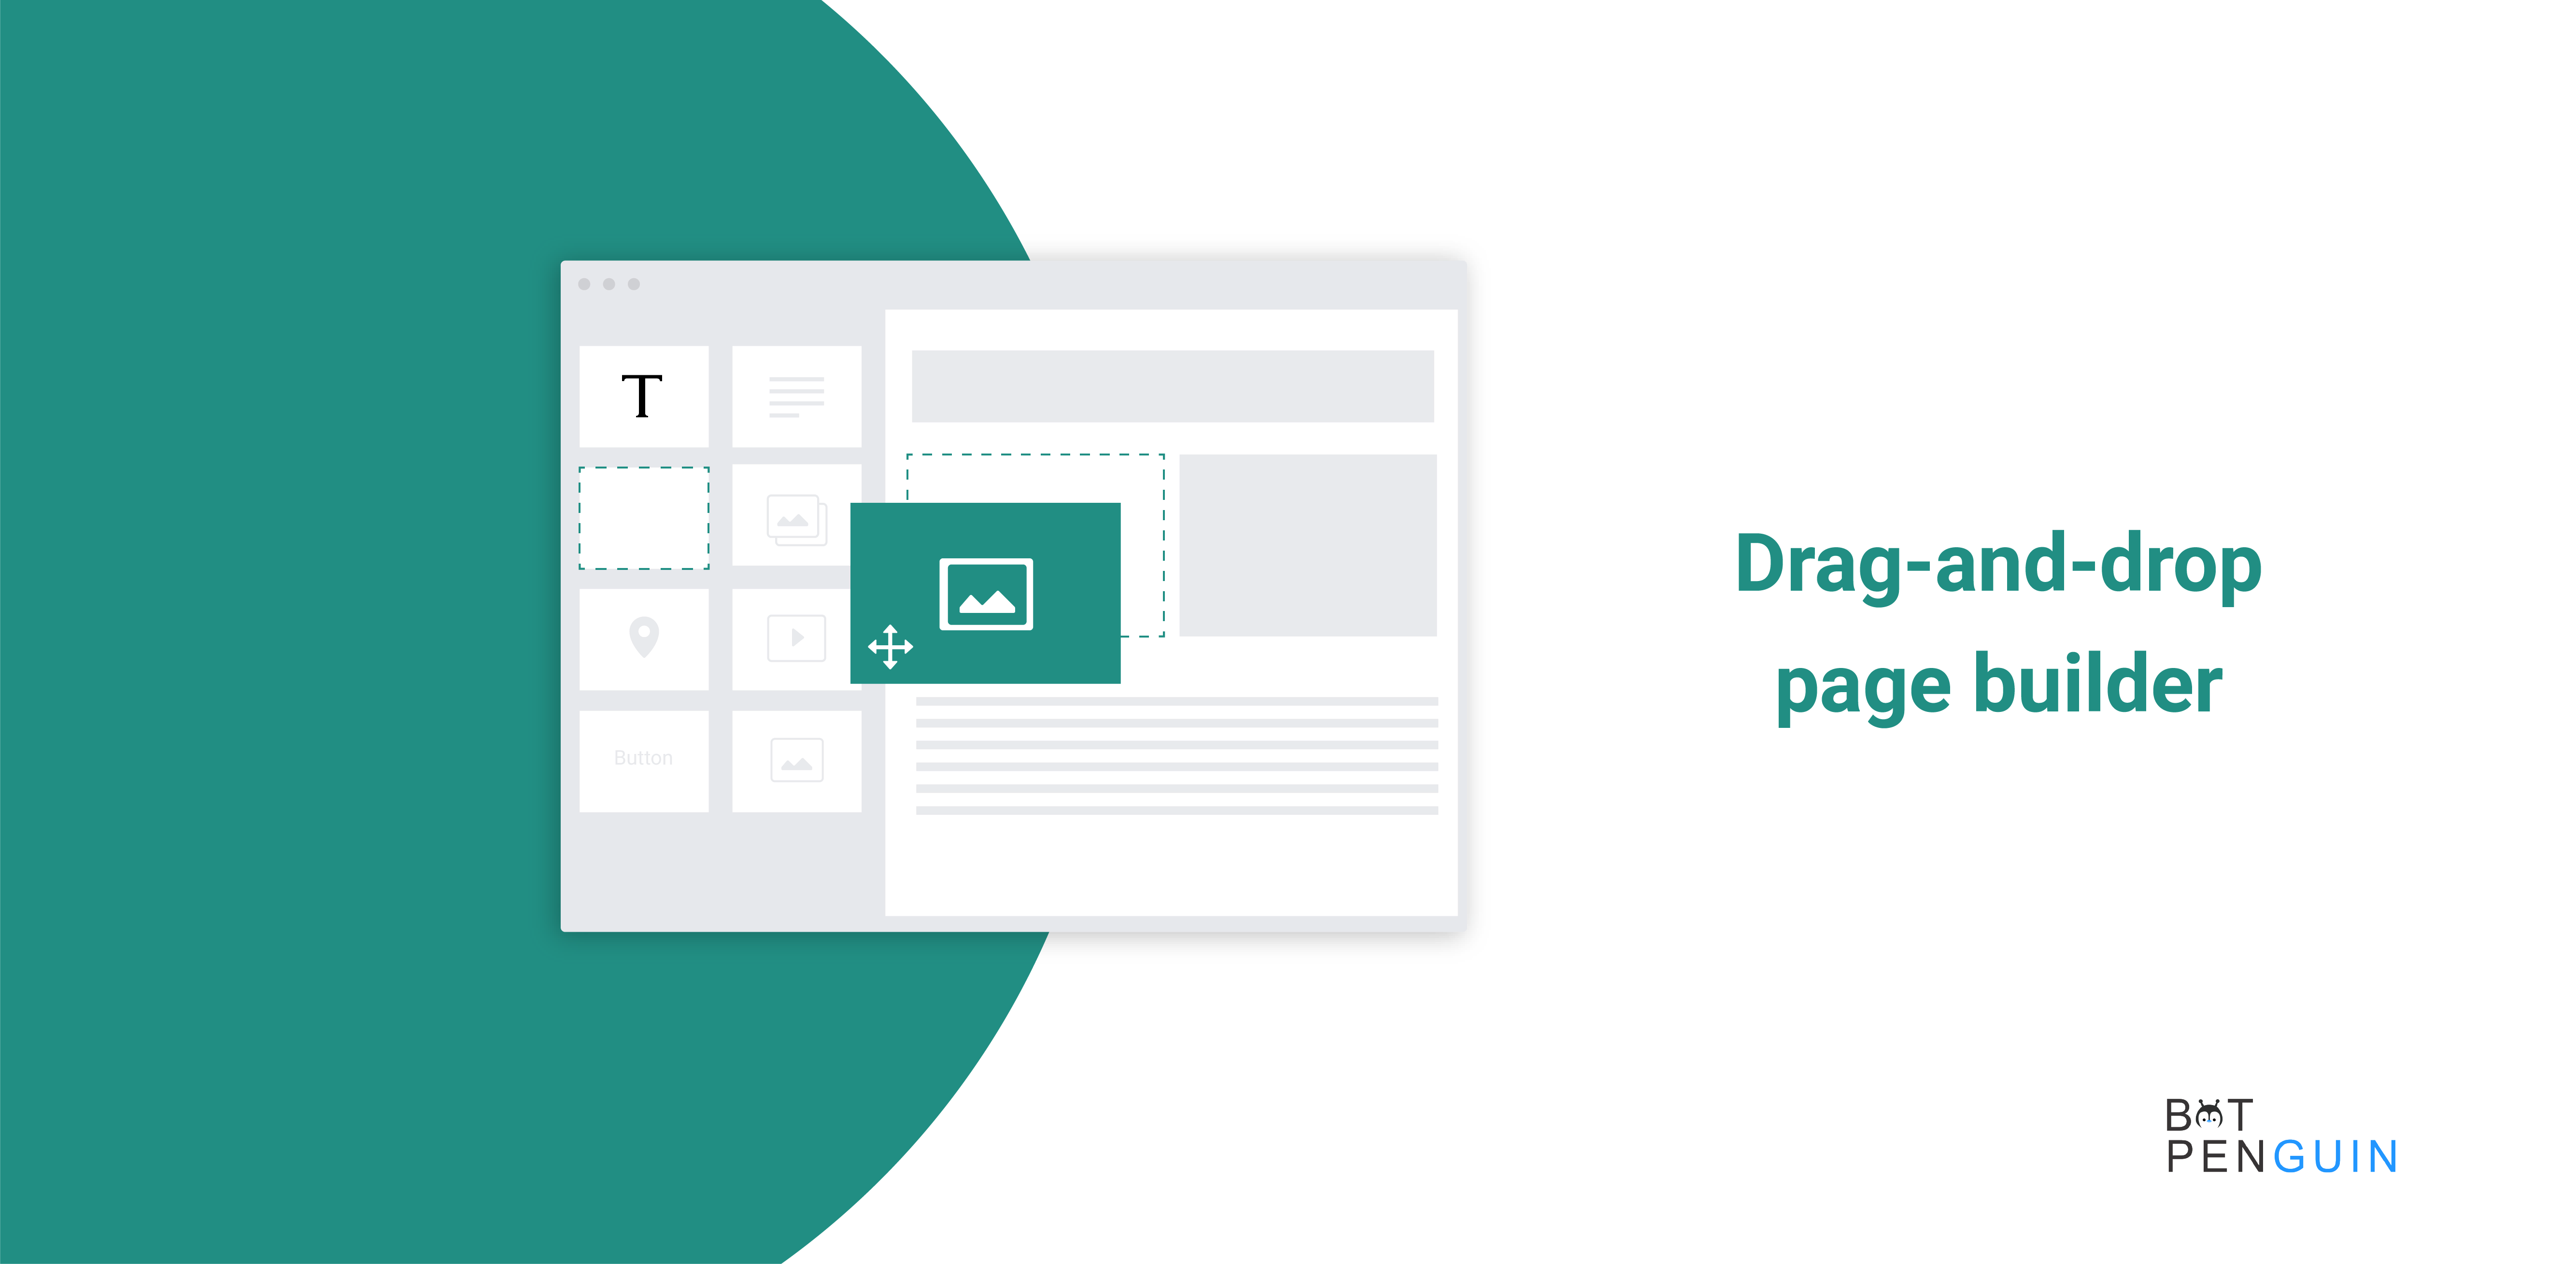 You may make use of its drag-and-drop page builder